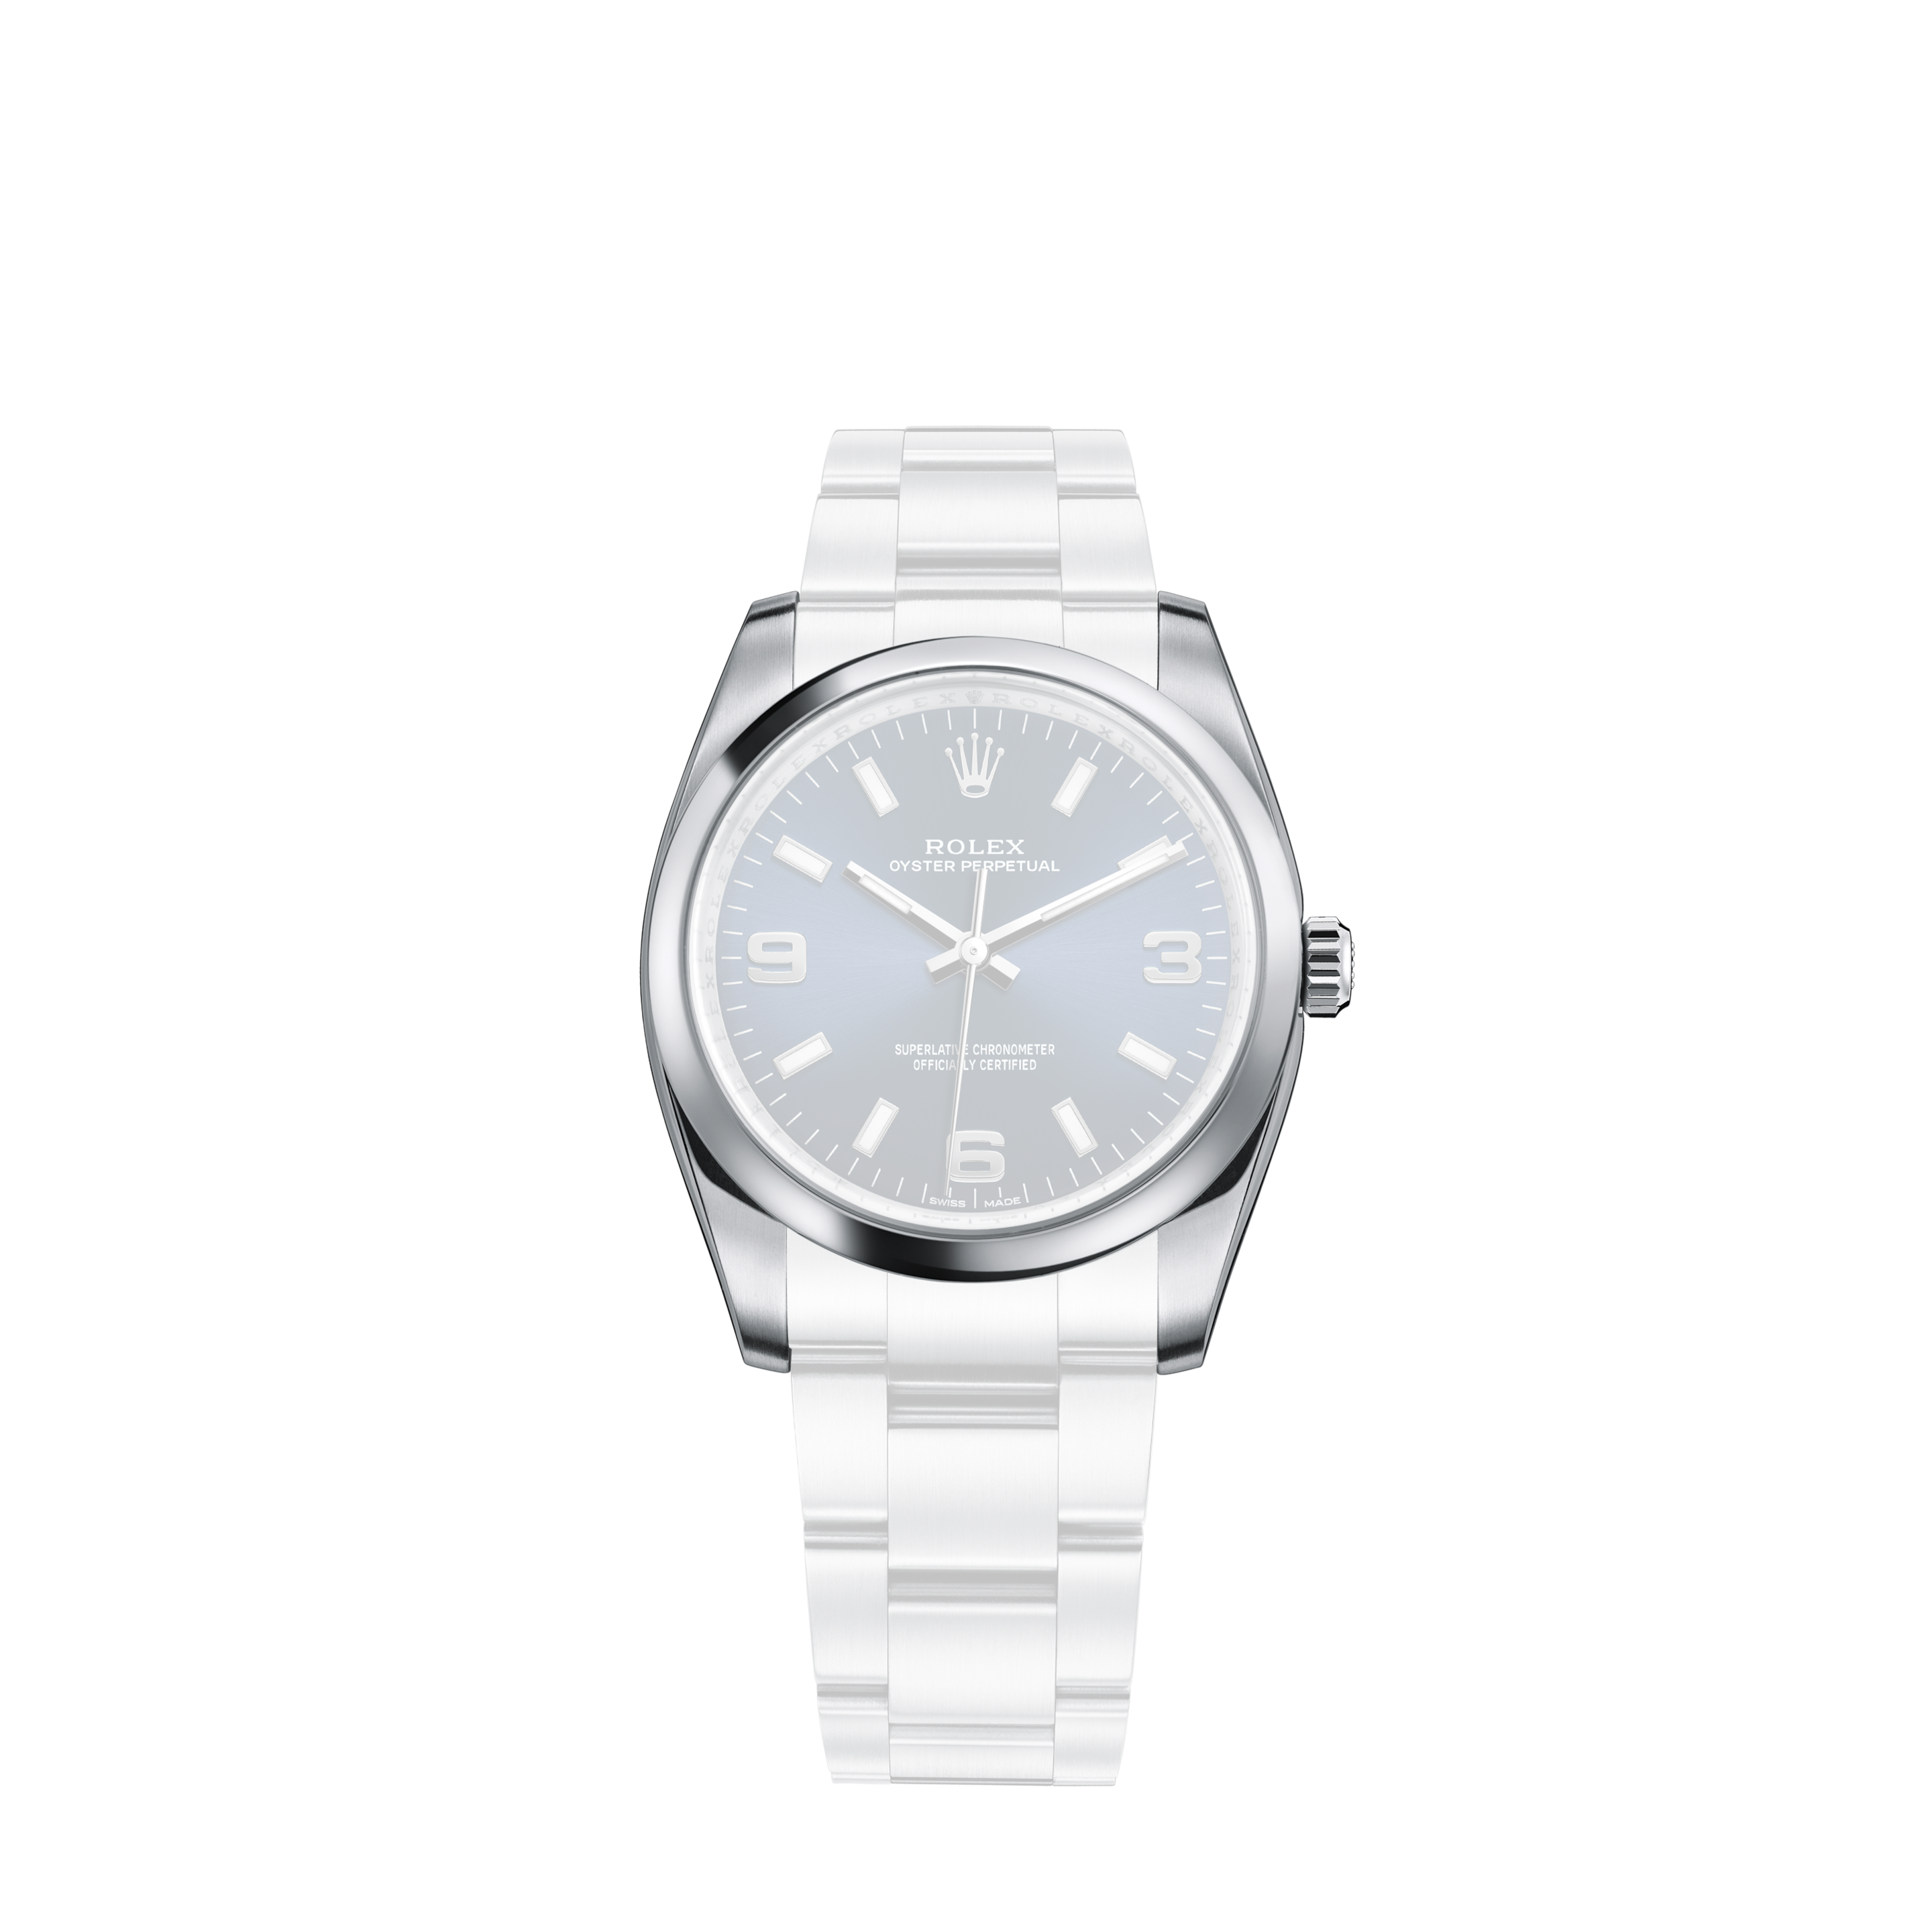 Rolex Datejust 36 Automatic Blue Dial Stainless Steel Unisex Watch - 126234-0017